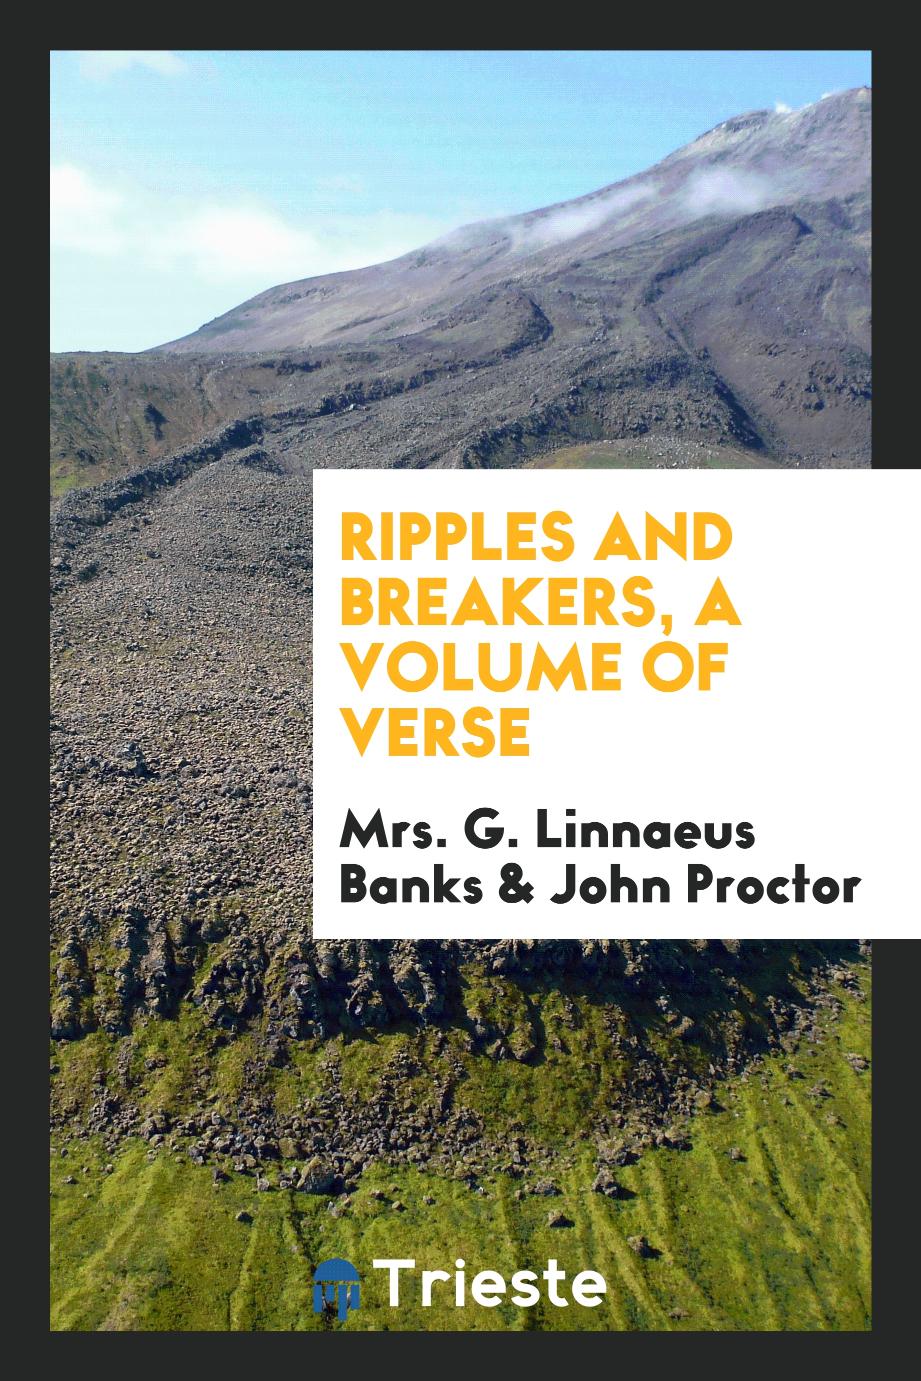 Ripples and breakers, a volume of verse